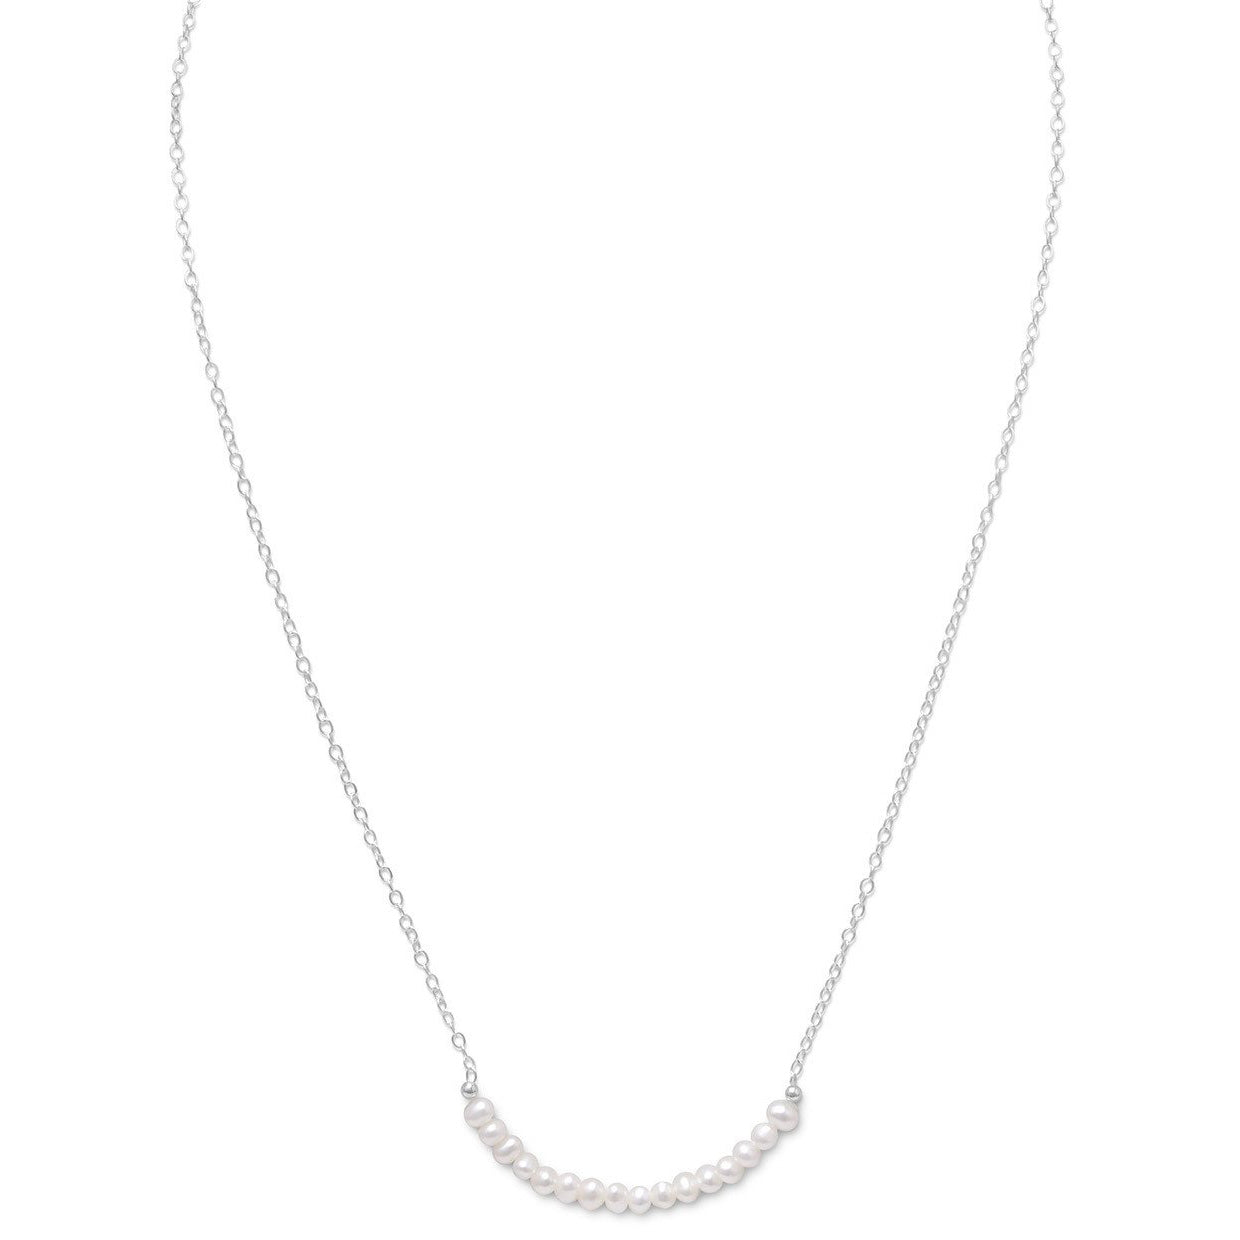 Sterling Silver 3mm Freshwater Cultured Pearl Rolo Necklace Pendant 16" + 1.5'' + Polishing Cloth (SKU: SS-PD1063)